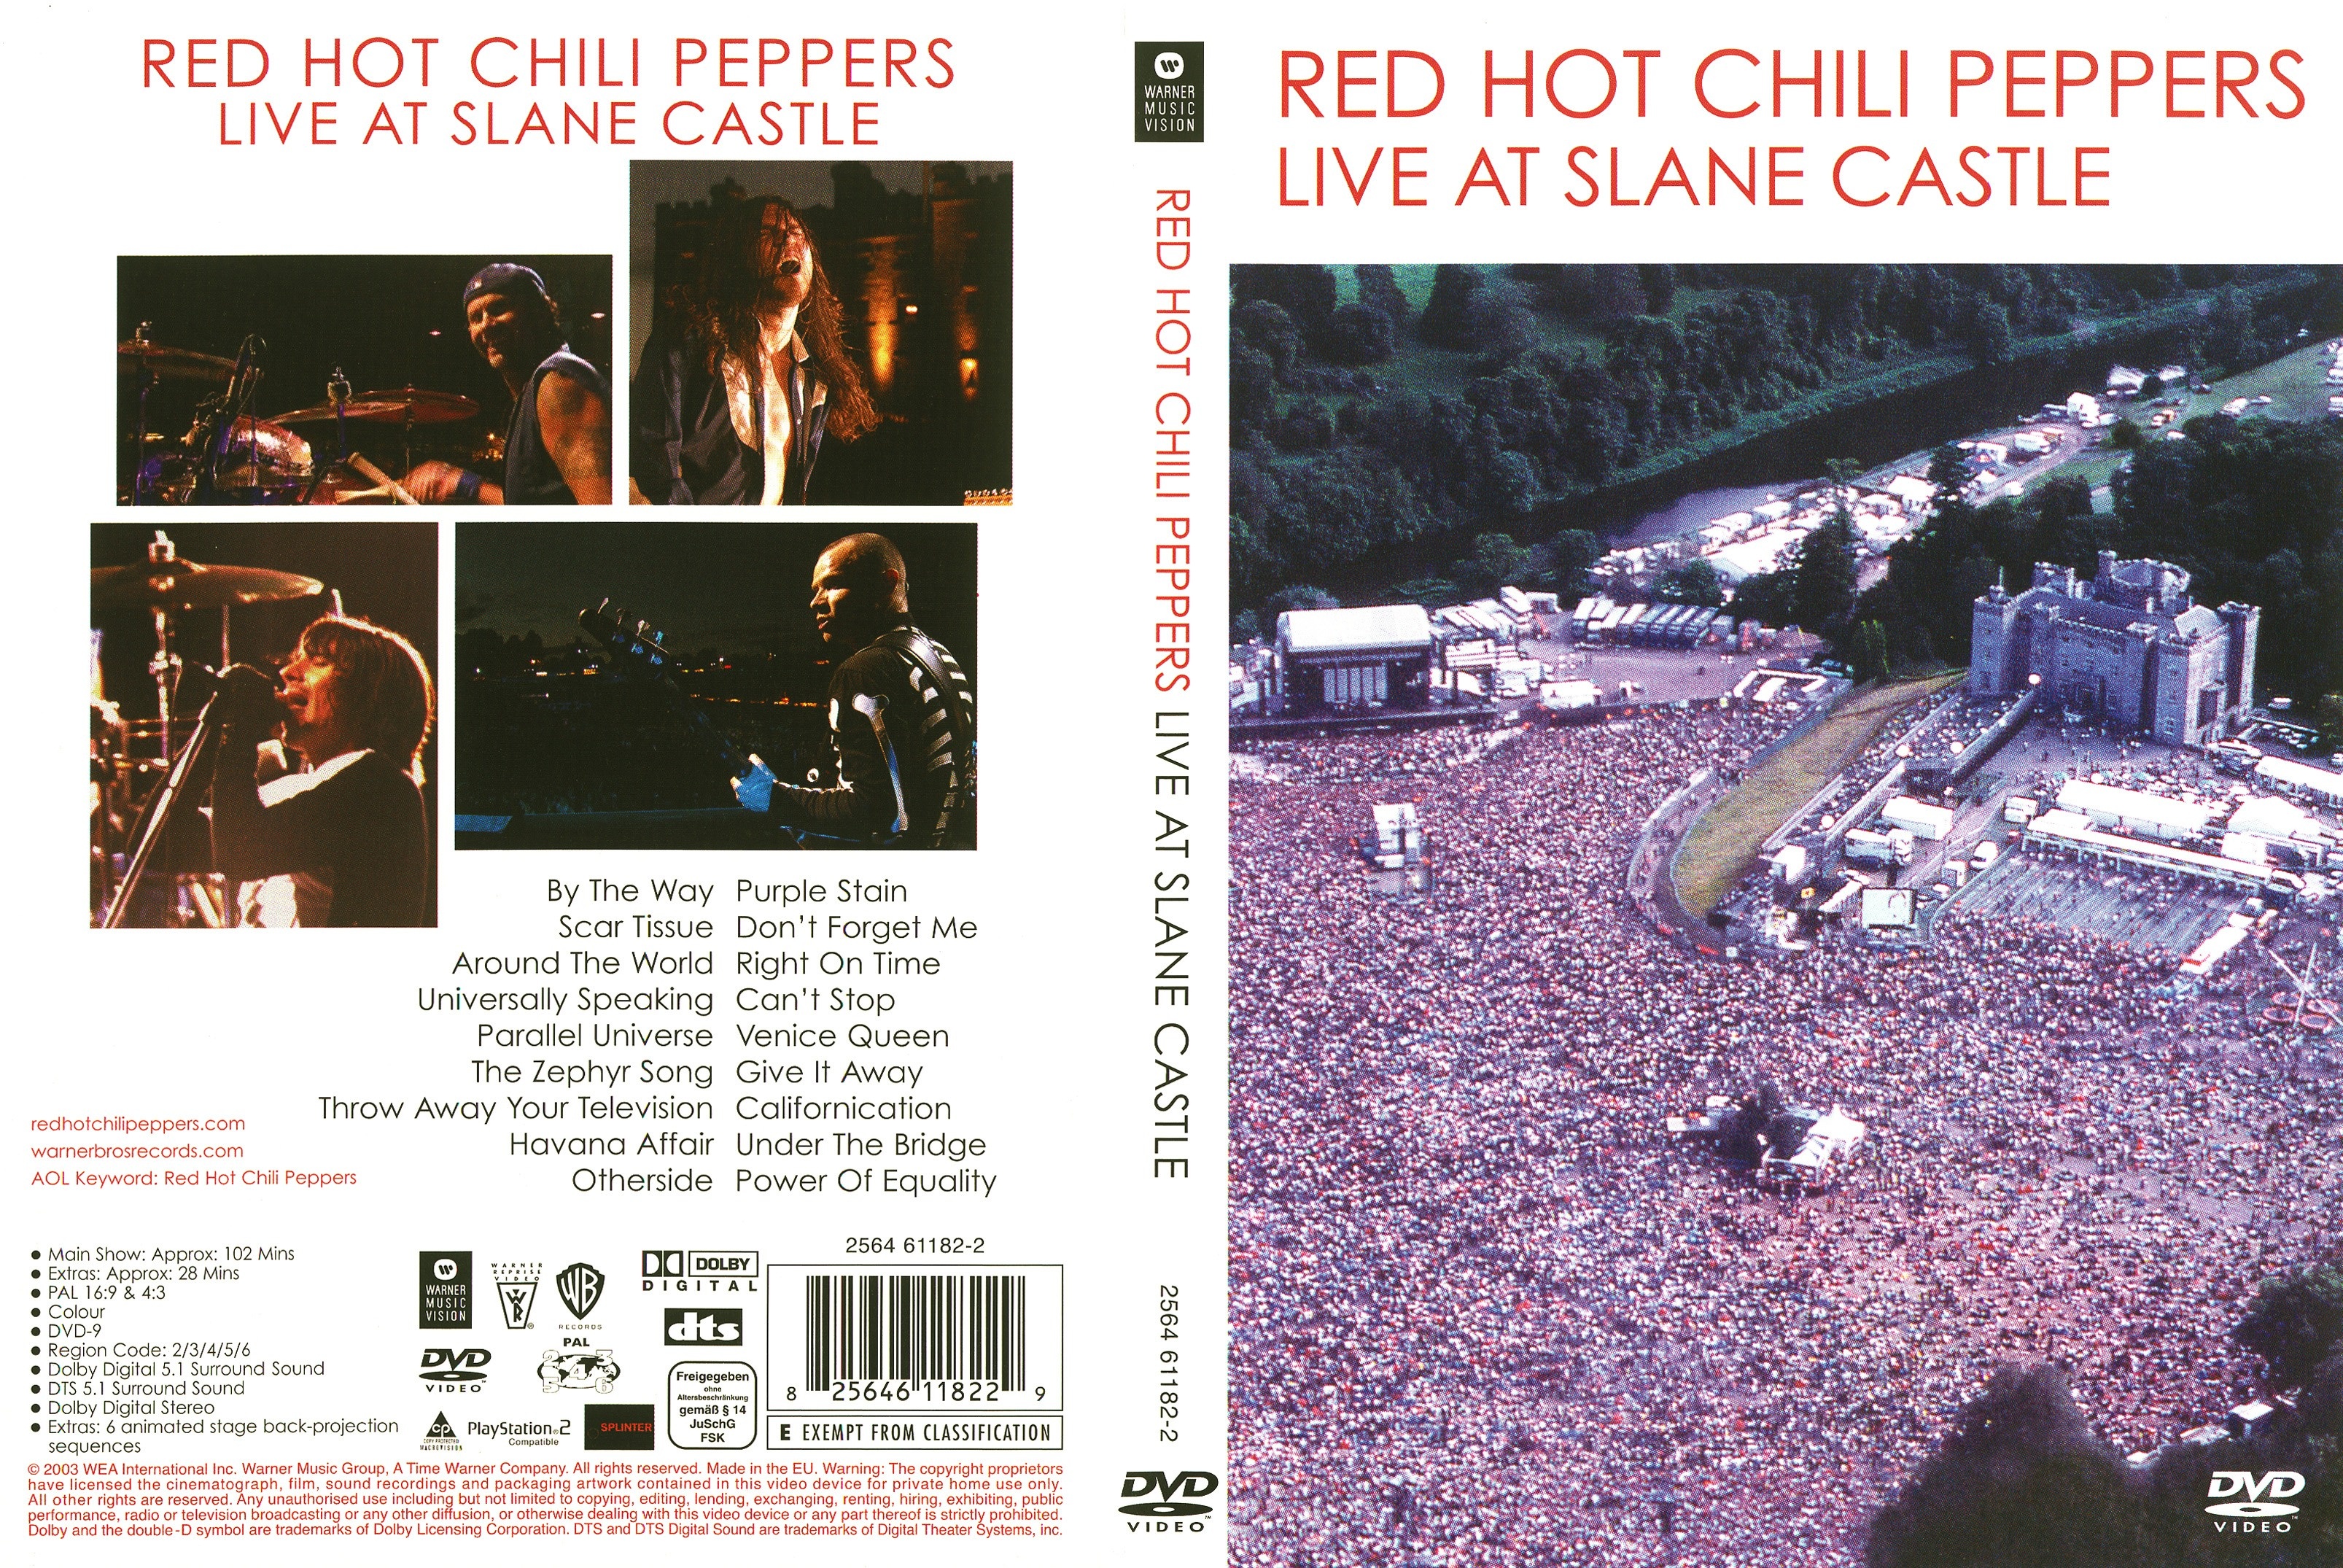 Jaquette DVD Red Hot Chili Peppers - Live at Slane Castle